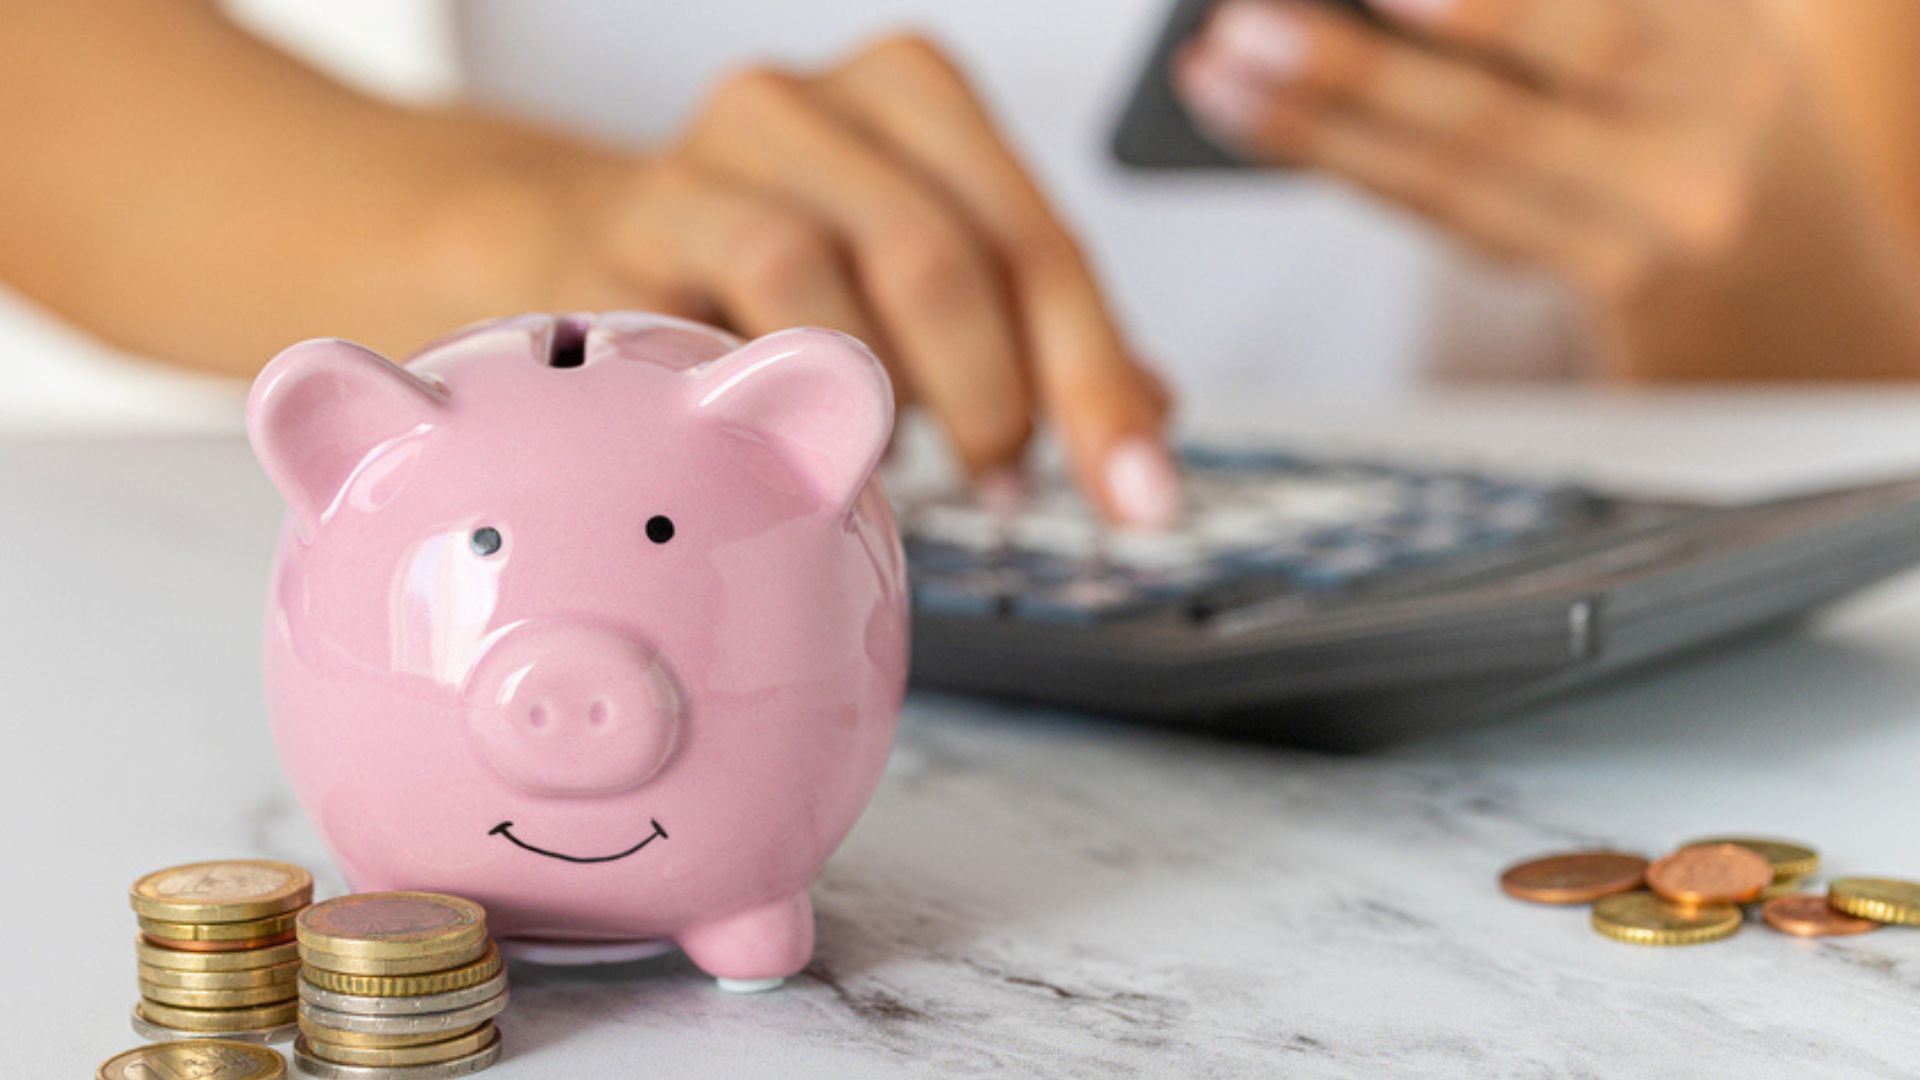 How To Choose The Most Lucrative Savings Account?